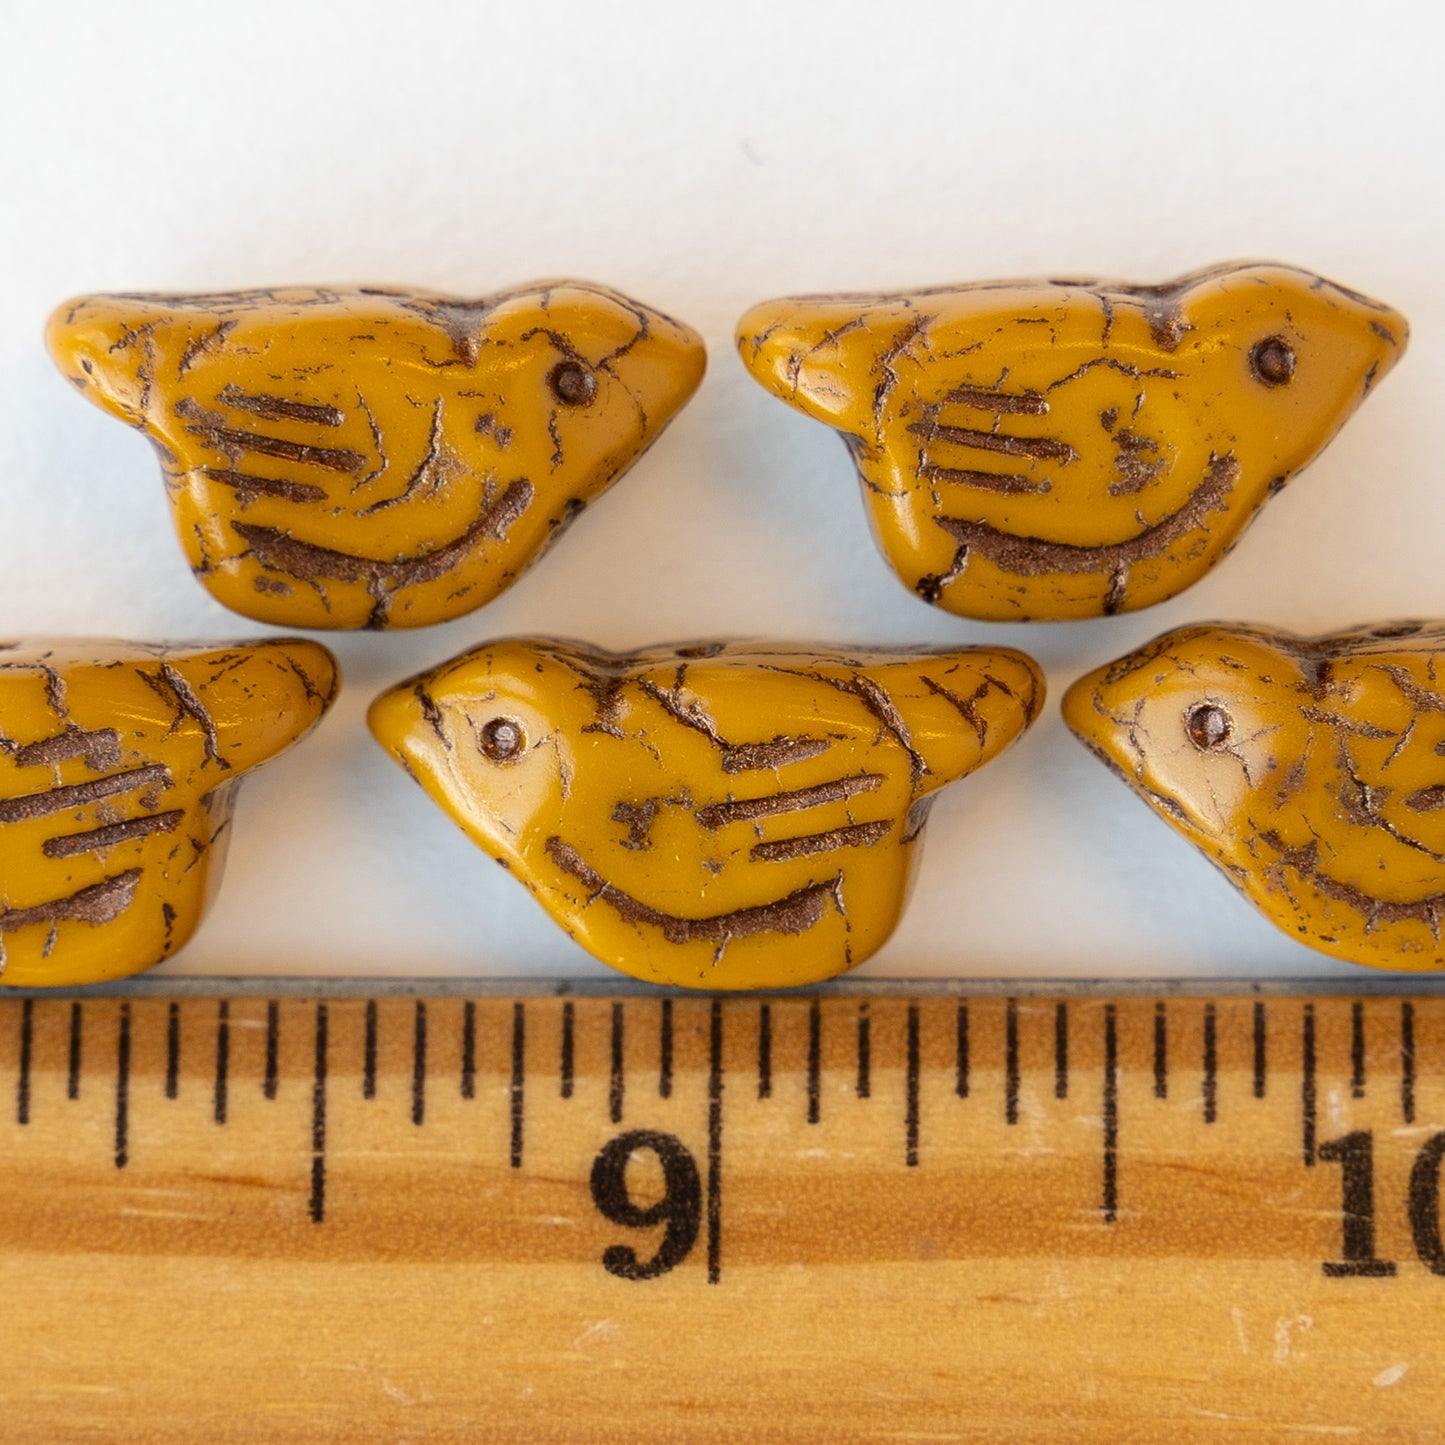 Load image into Gallery viewer, Bird Beads -  Ochre with Bronze - 2 or 6 Birds
